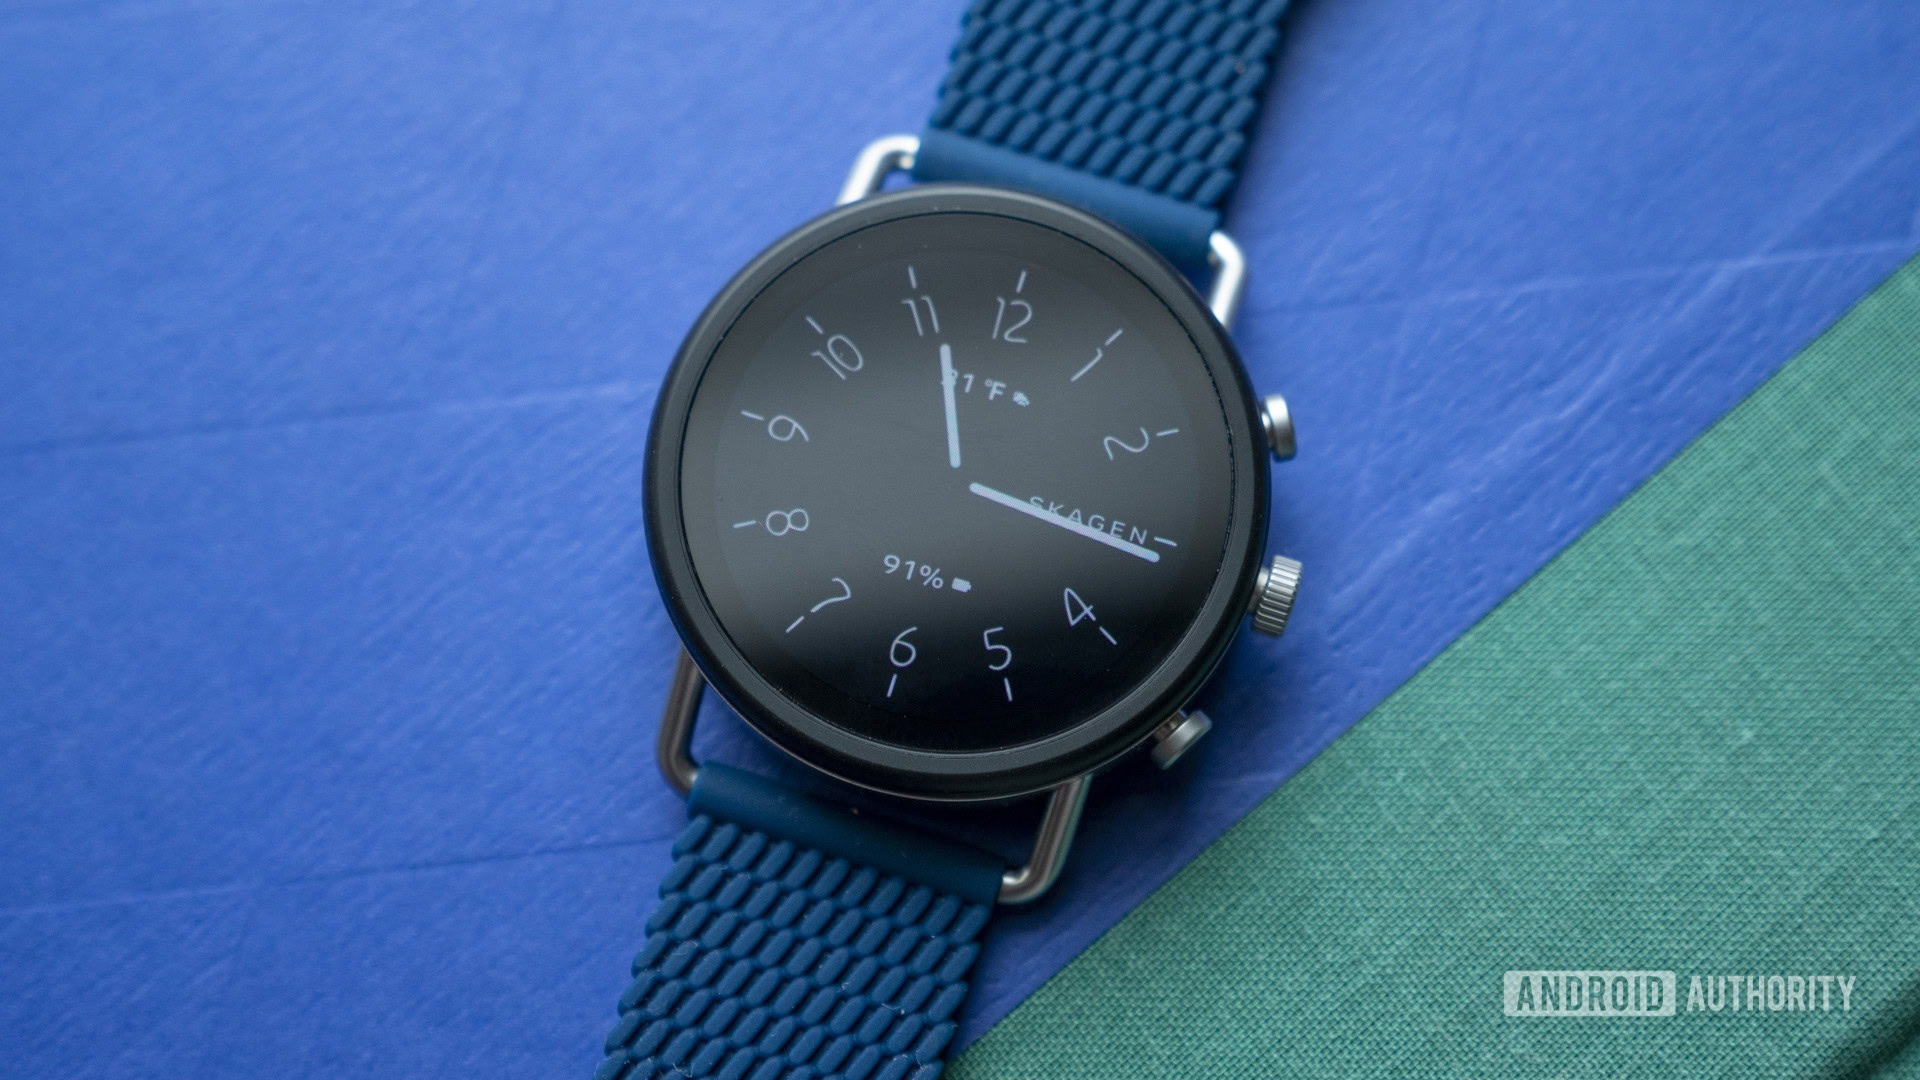 fashion smartwatches you can buy - Android Authority